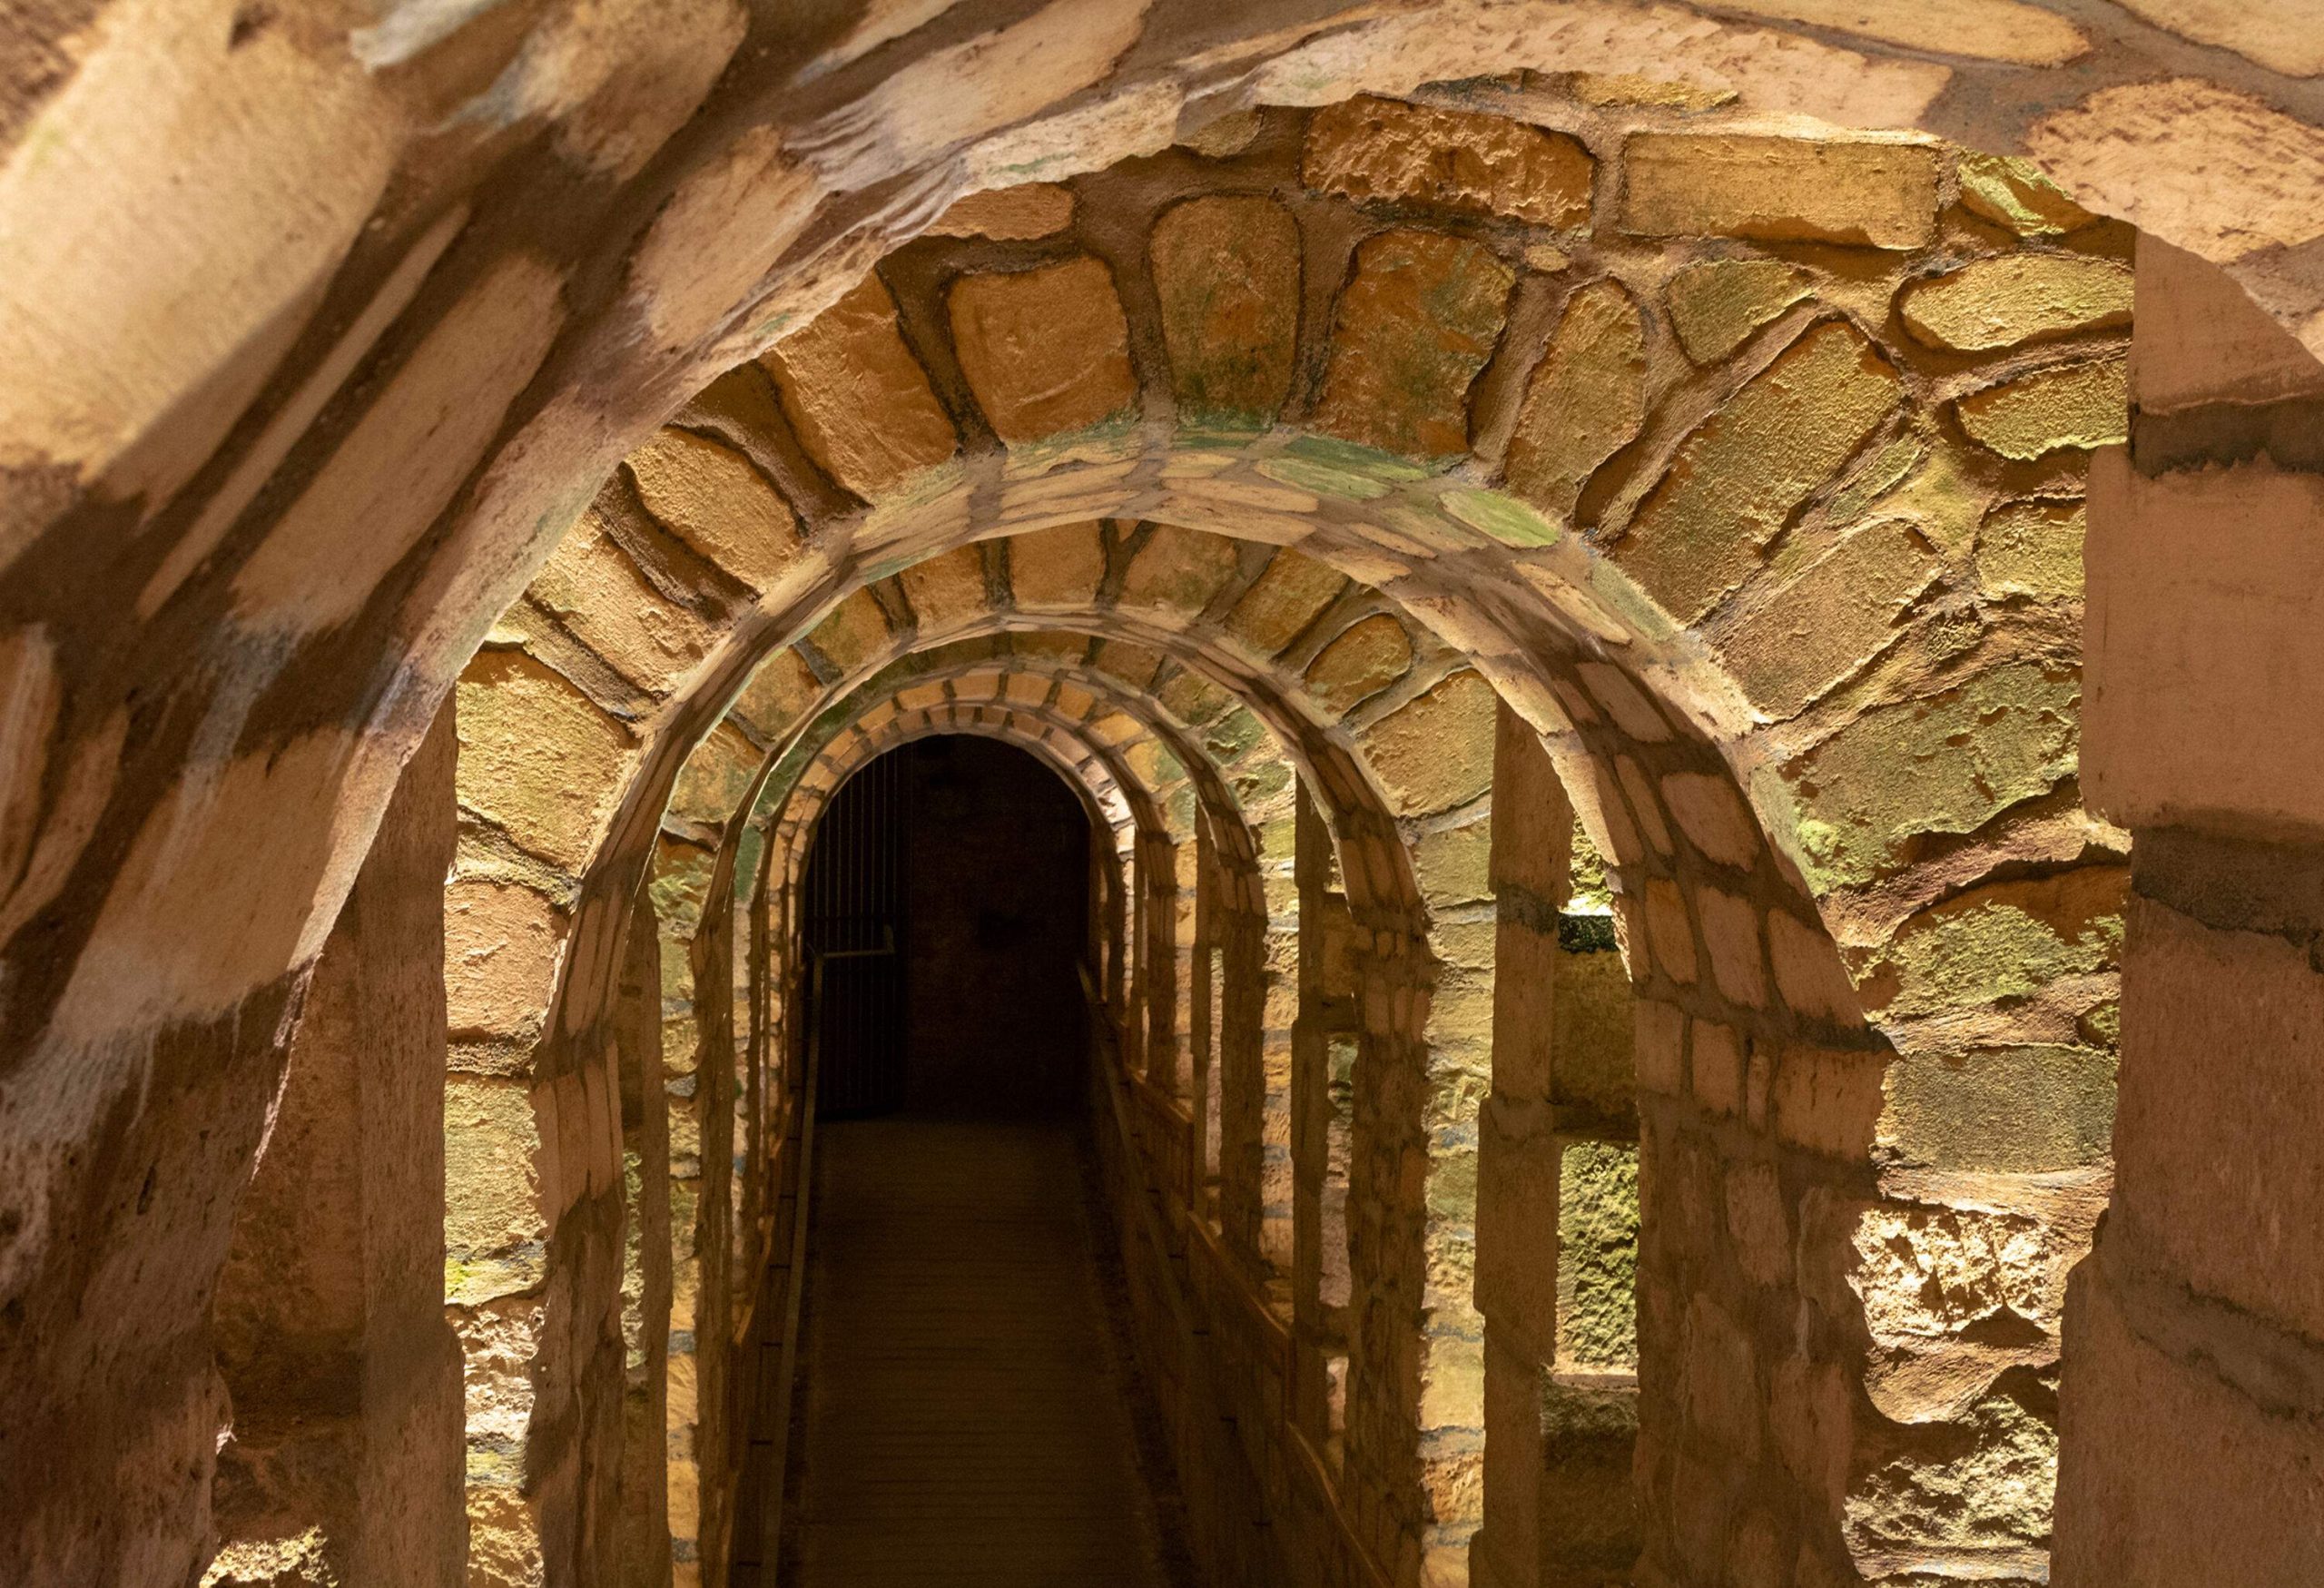 A row of stone arches in a tunnel inside a catacombs.